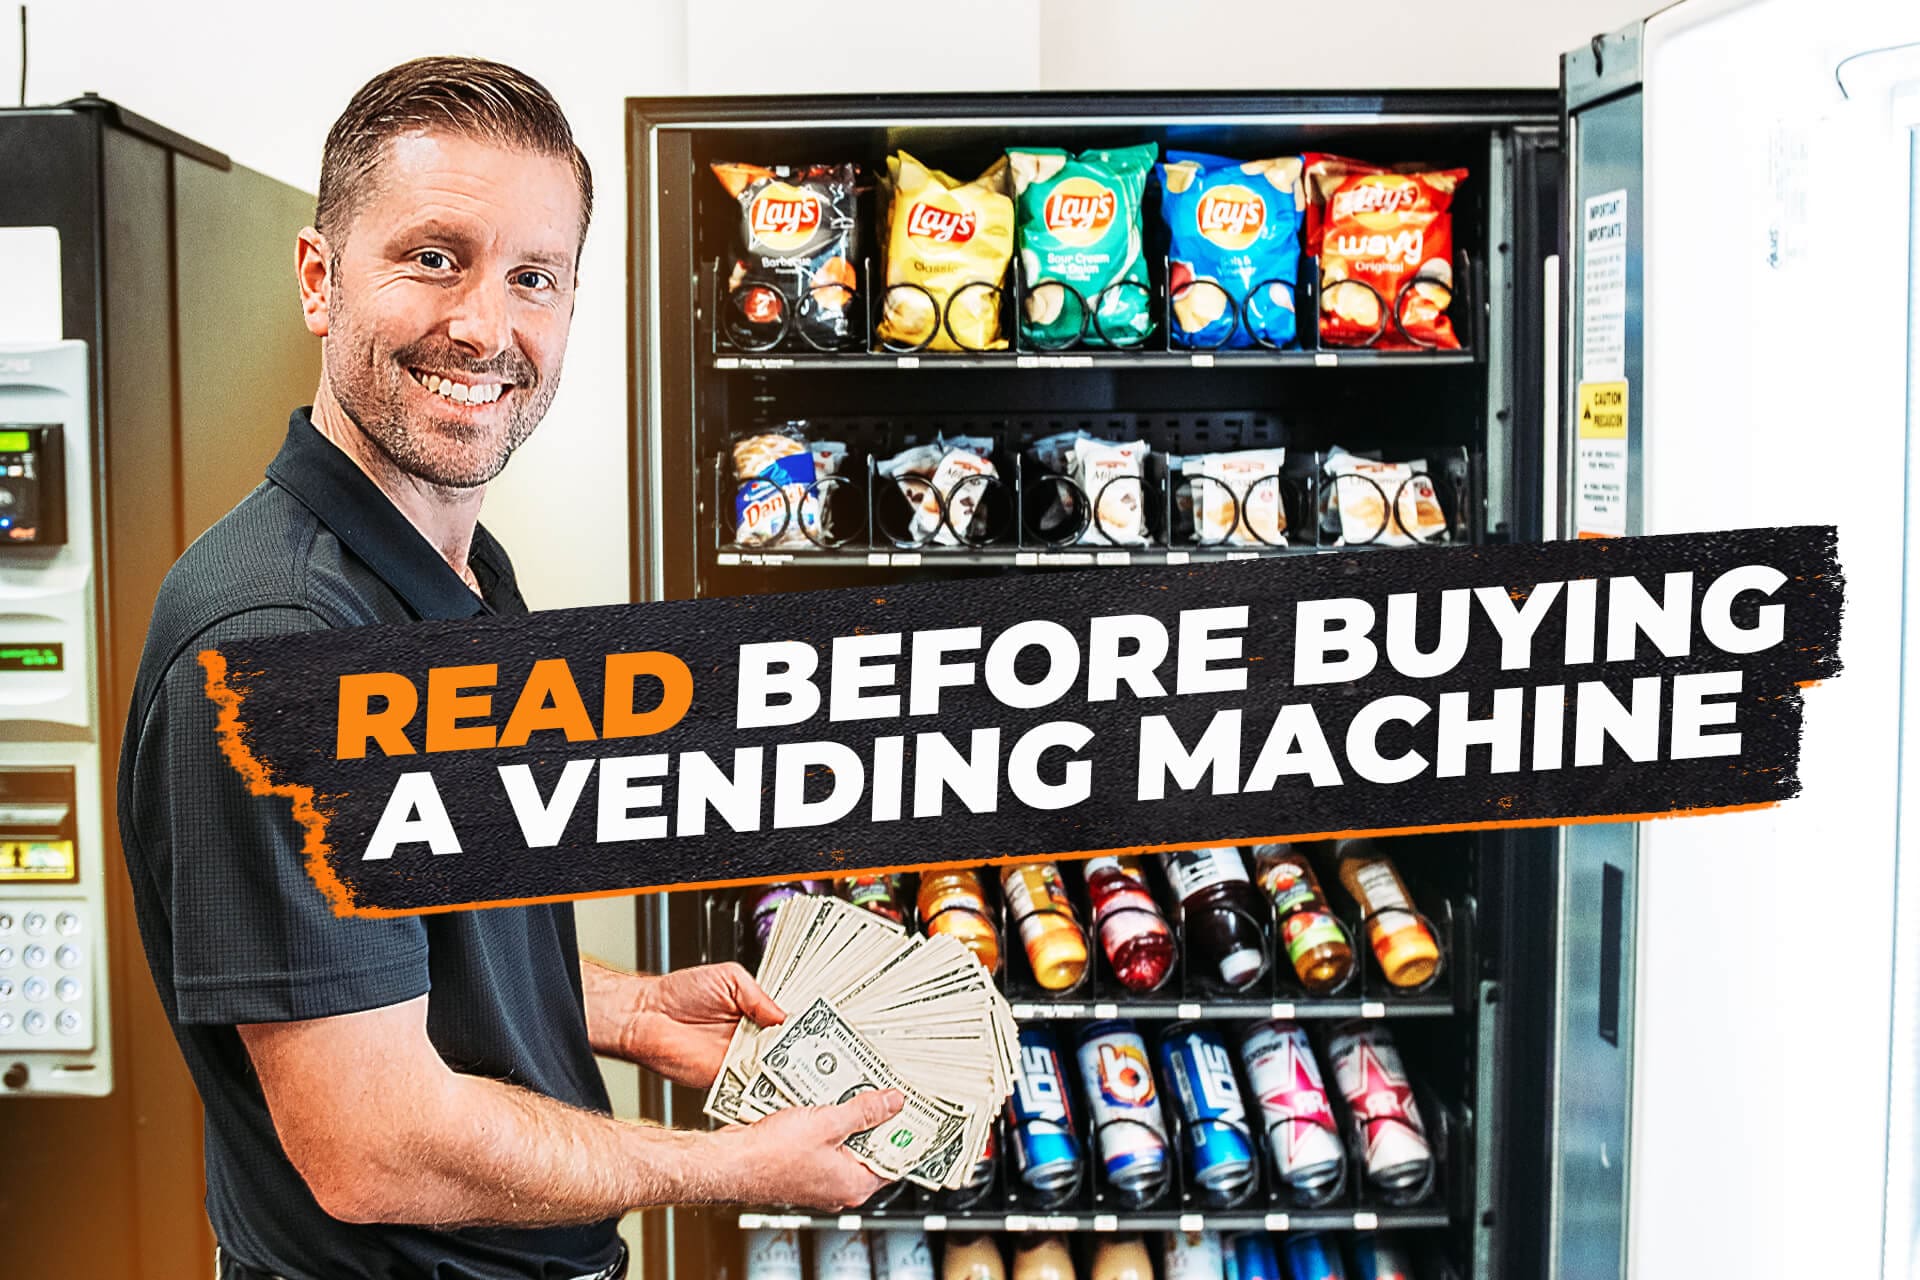 Man in front of an open vending machine